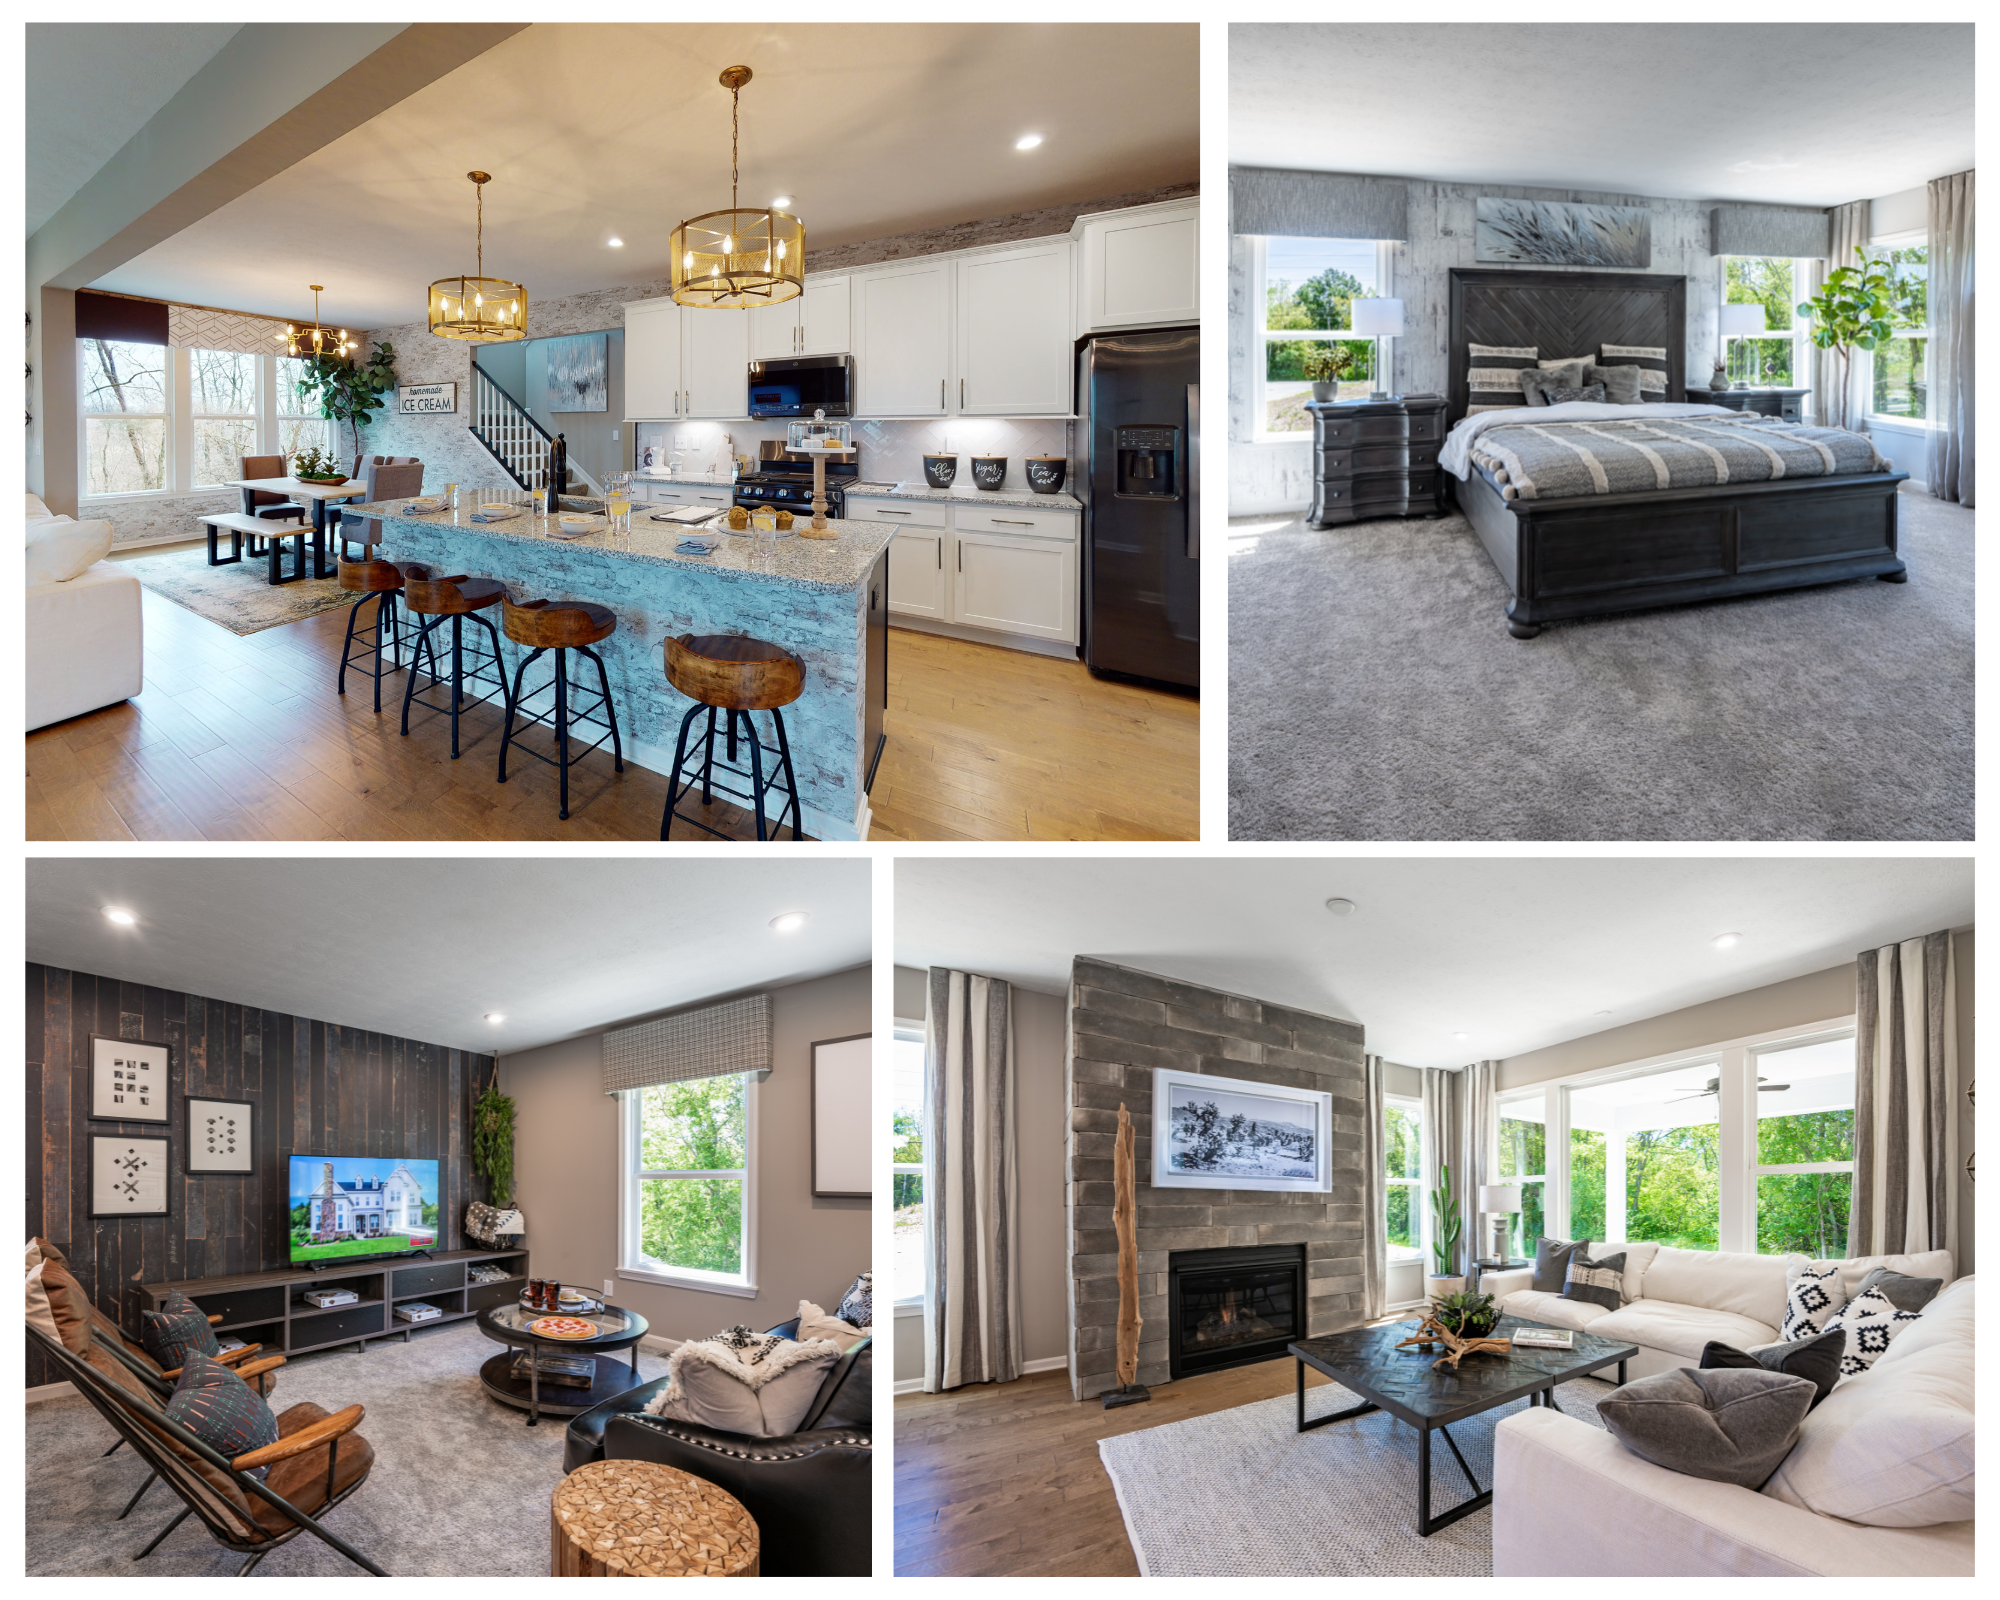 The featured model home at Bridle Run, is the floorplan the Wyatt, from the Designer Collection of Homes.